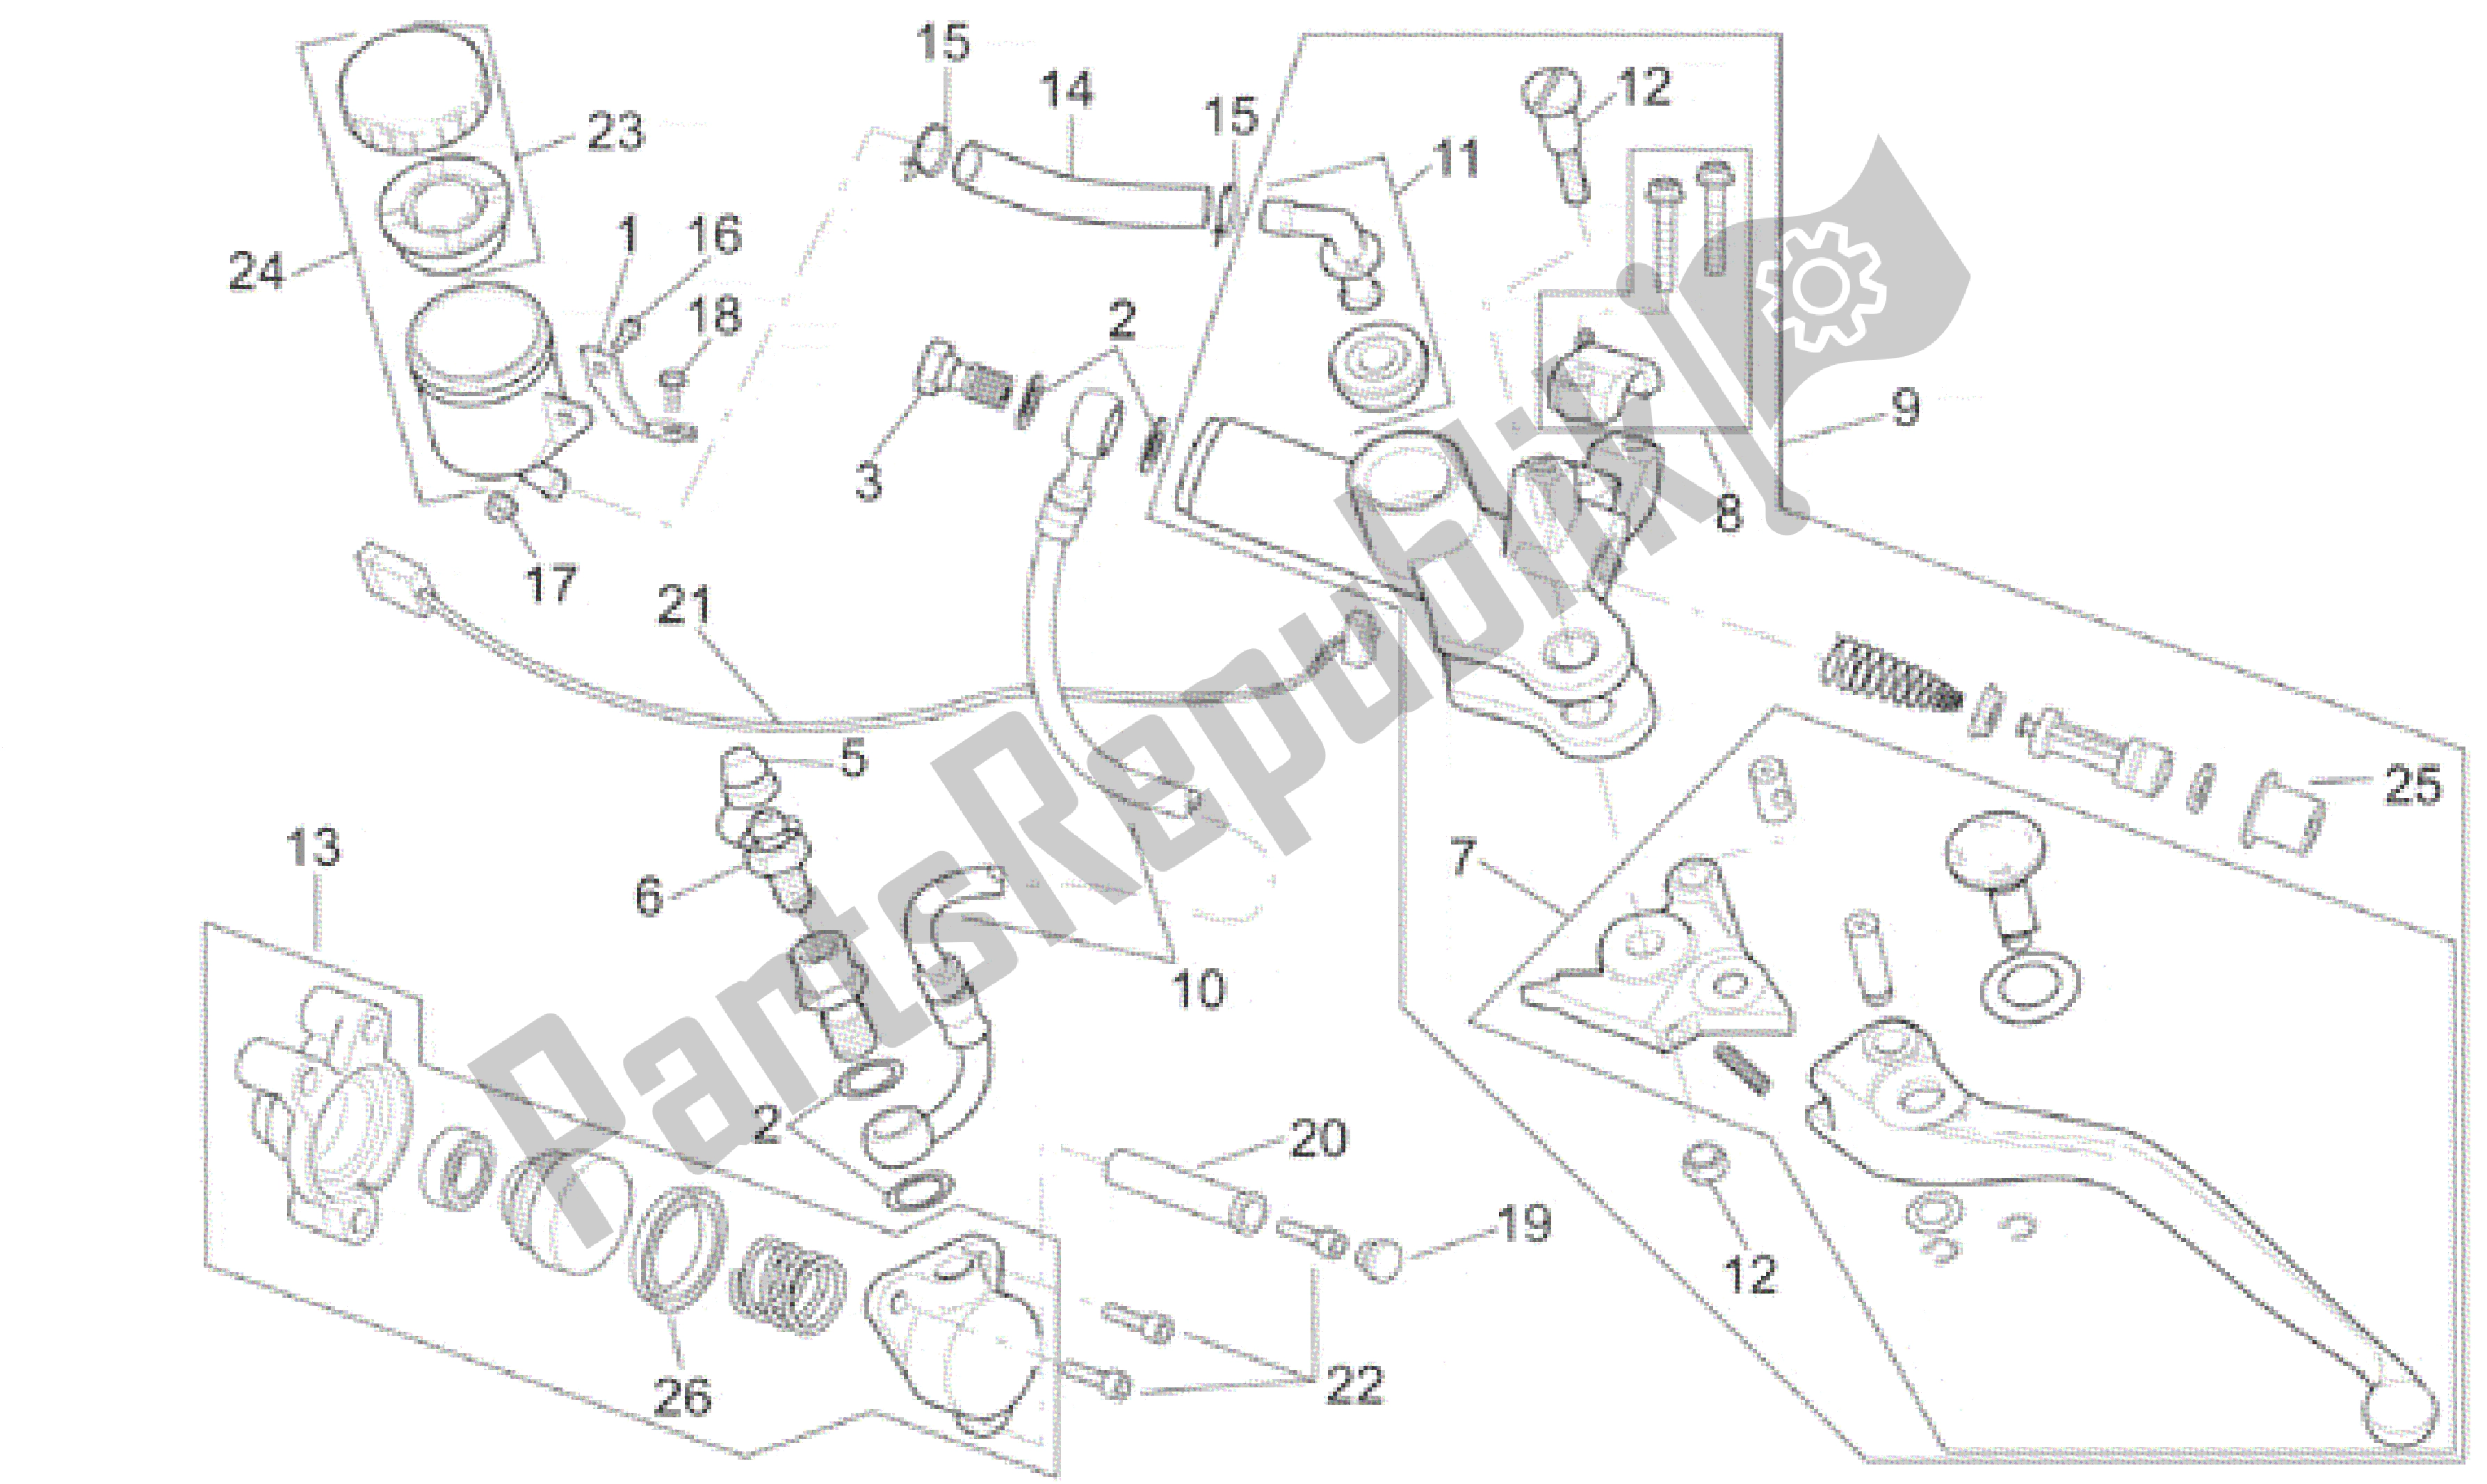 All parts for the Clutch Pump of the Aprilia RSV Mille 3901 1000 2001 - 2002